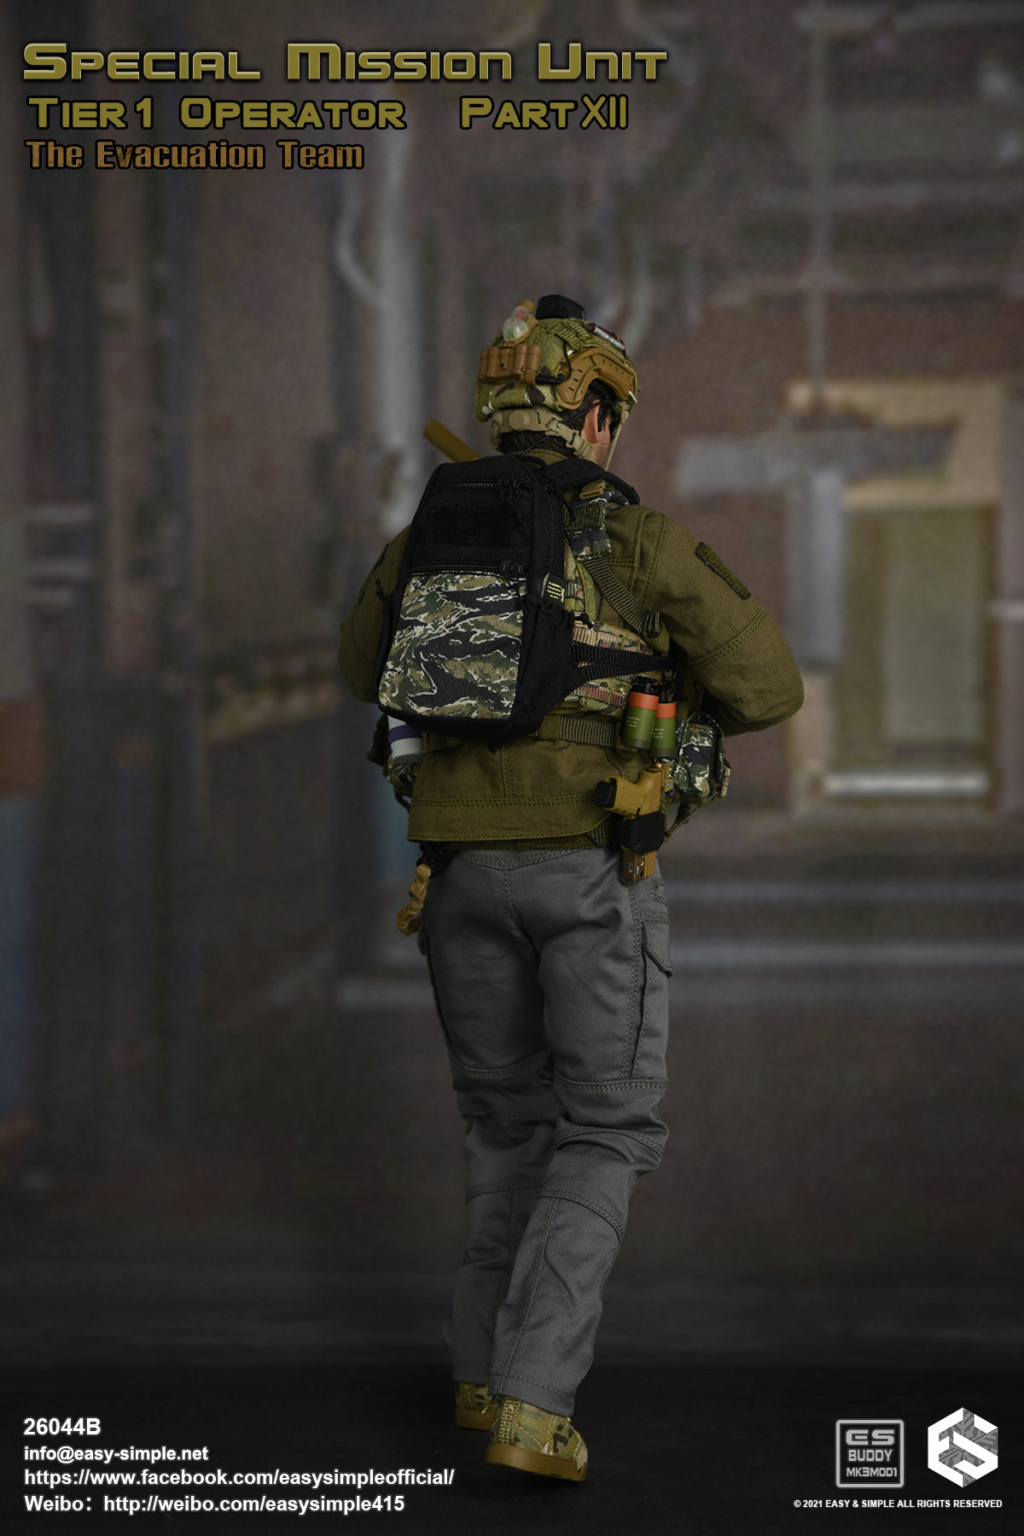 Tier1Operator - NEW PRODUCT: Easy&Simple: 26044B Special Mission Unit Tier1 Operator Part XII The Evacuation Team A50be210